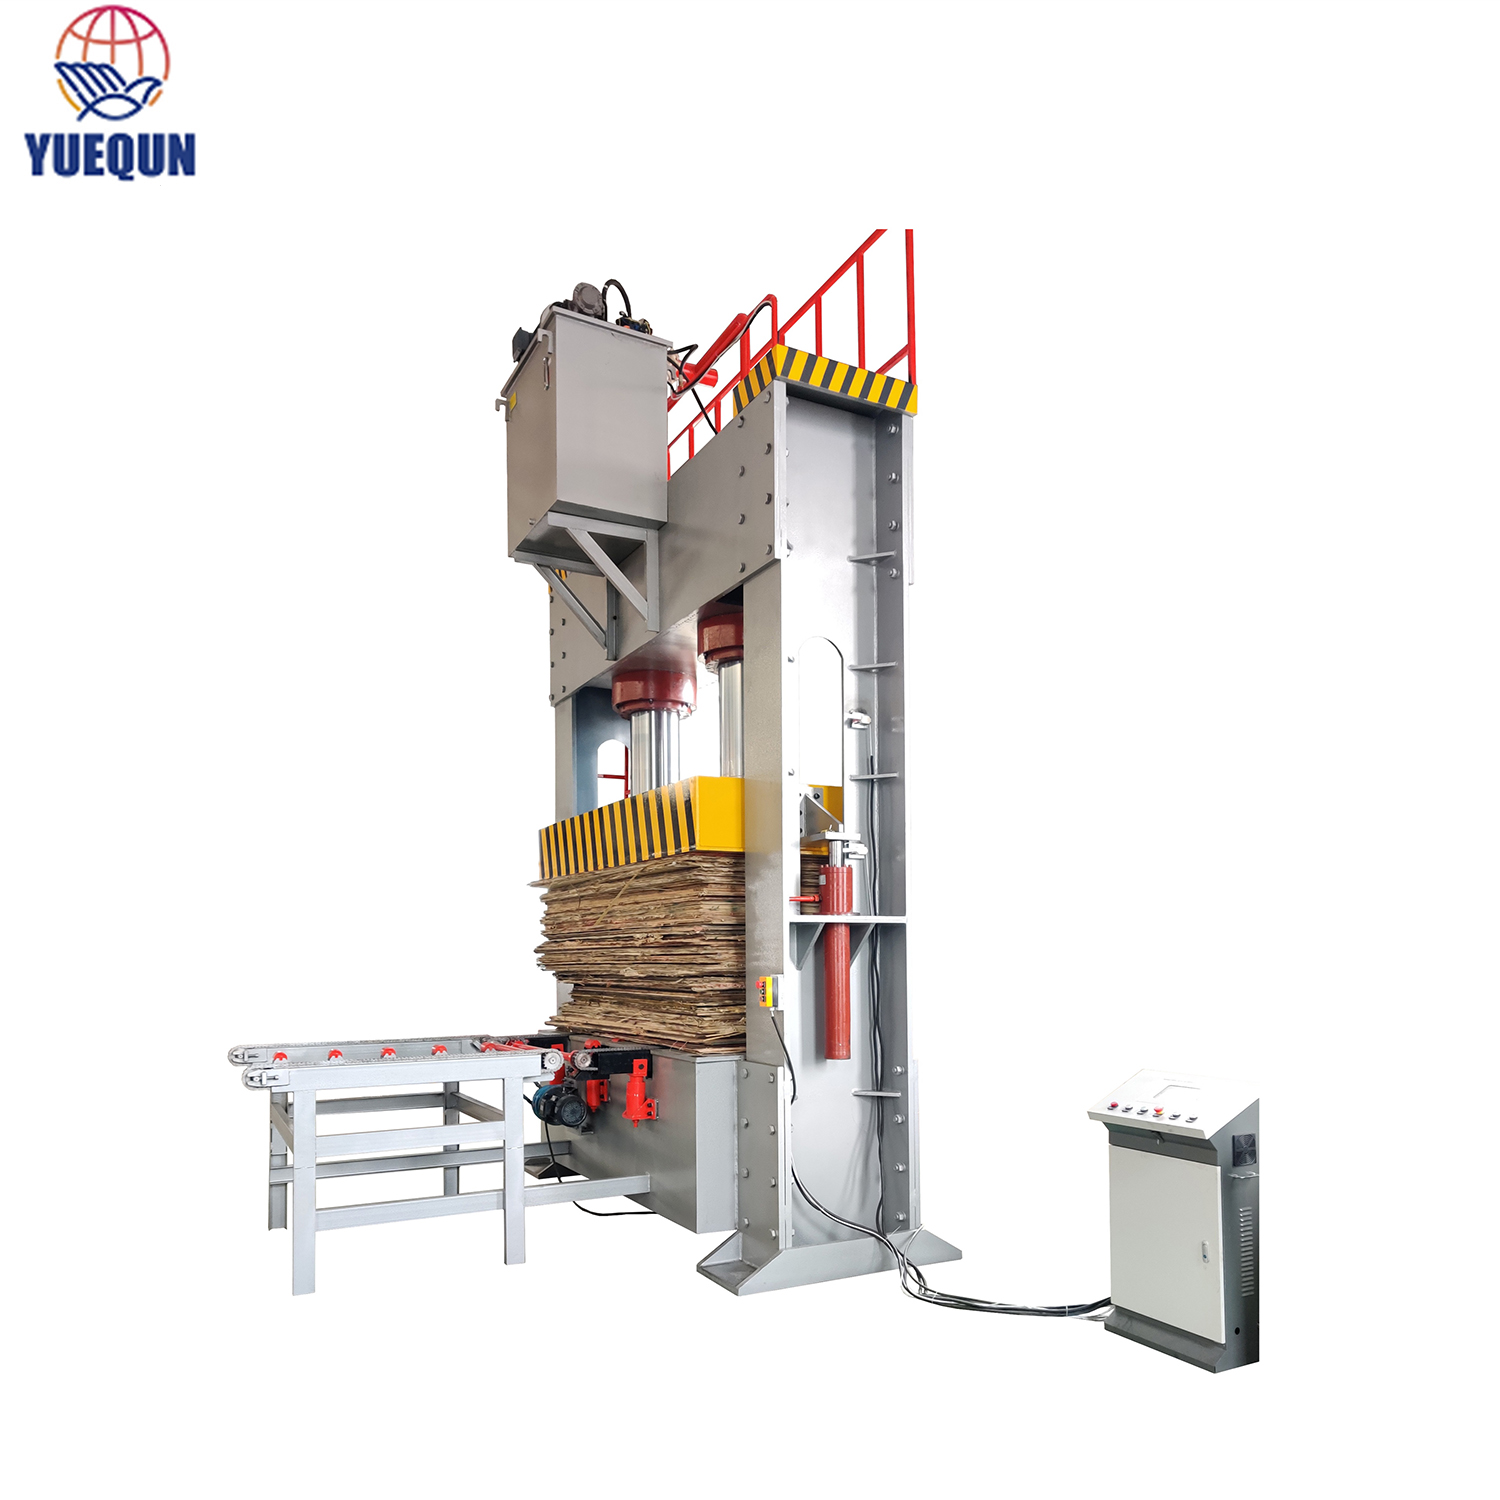  500 tons cold press machine for plywood production line